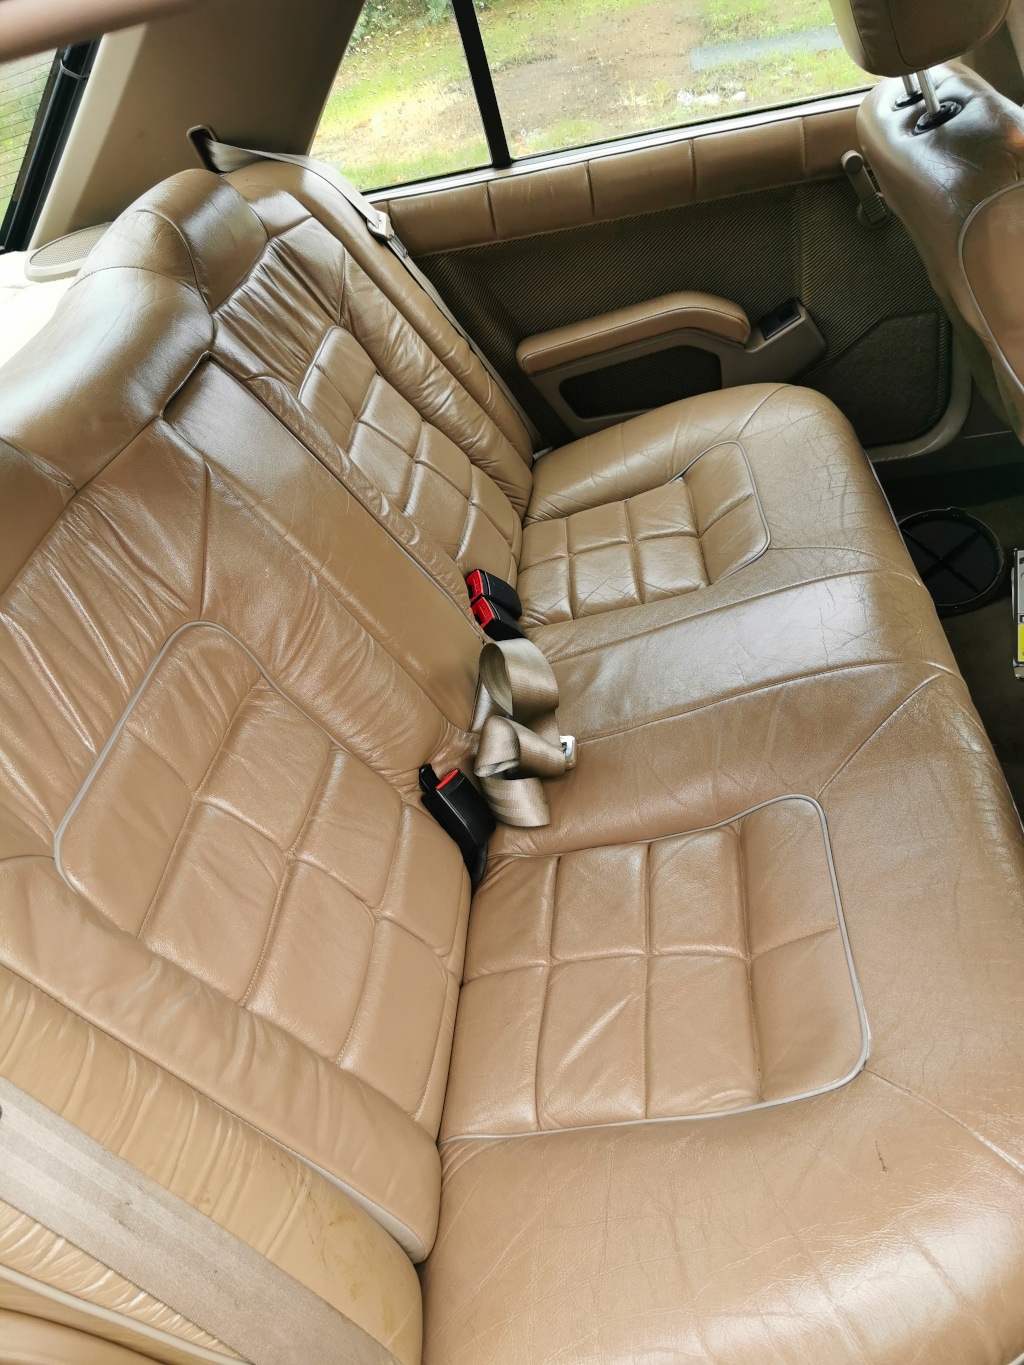 Renault 25 Monaco rear seat after application of leather conditioner